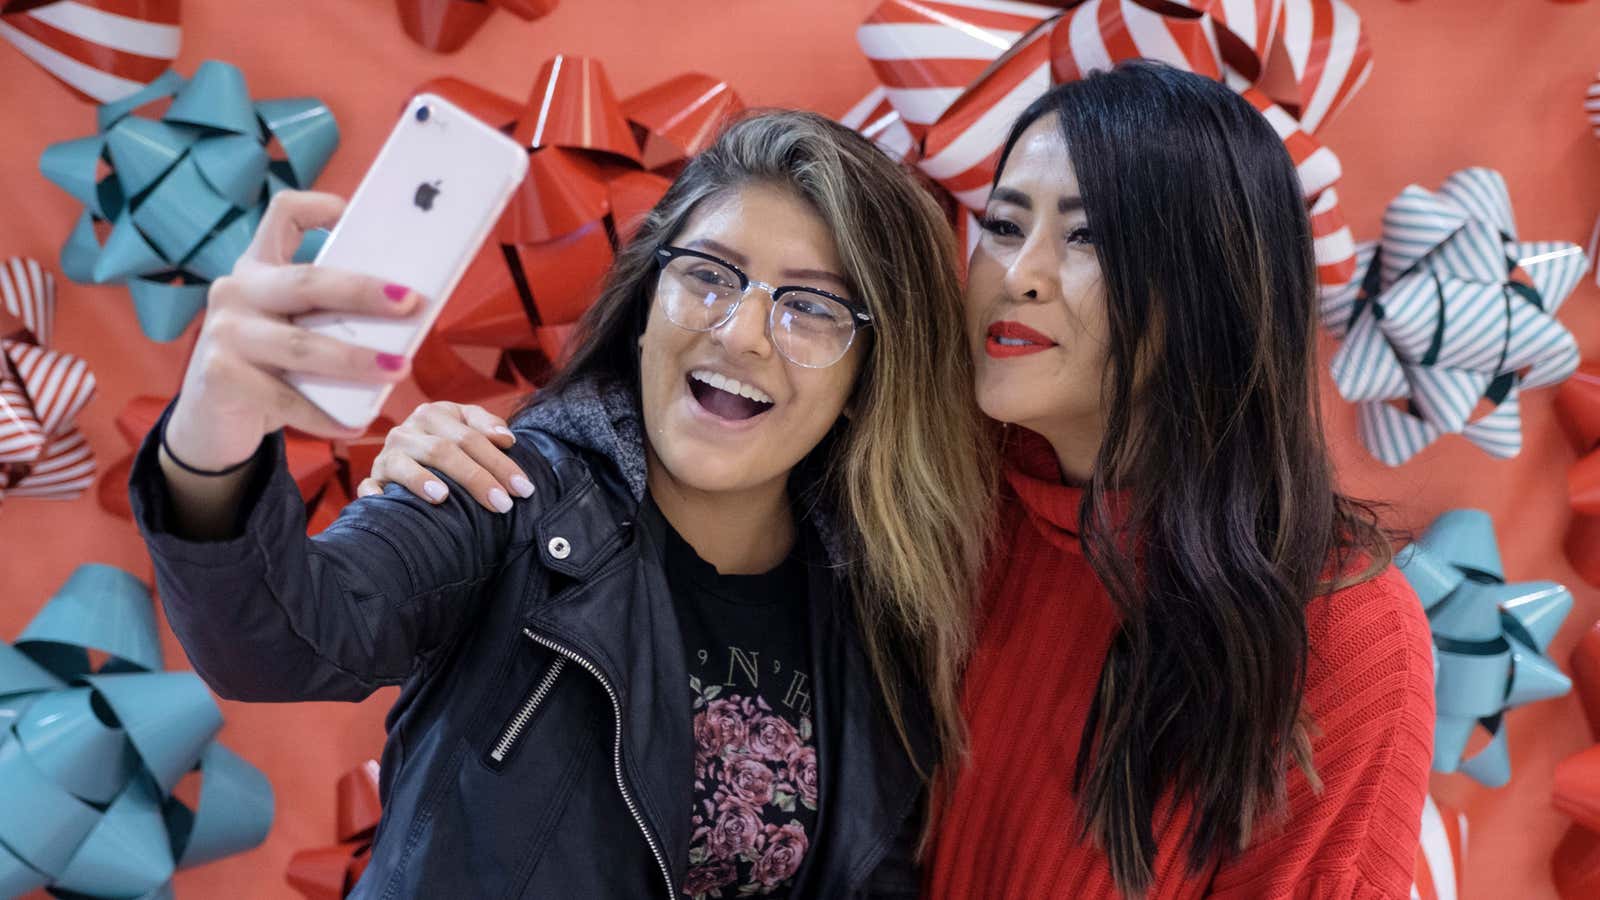 Social media influencer Sabrina Tan, right, poses with a shopper during a Sip n Shop event.